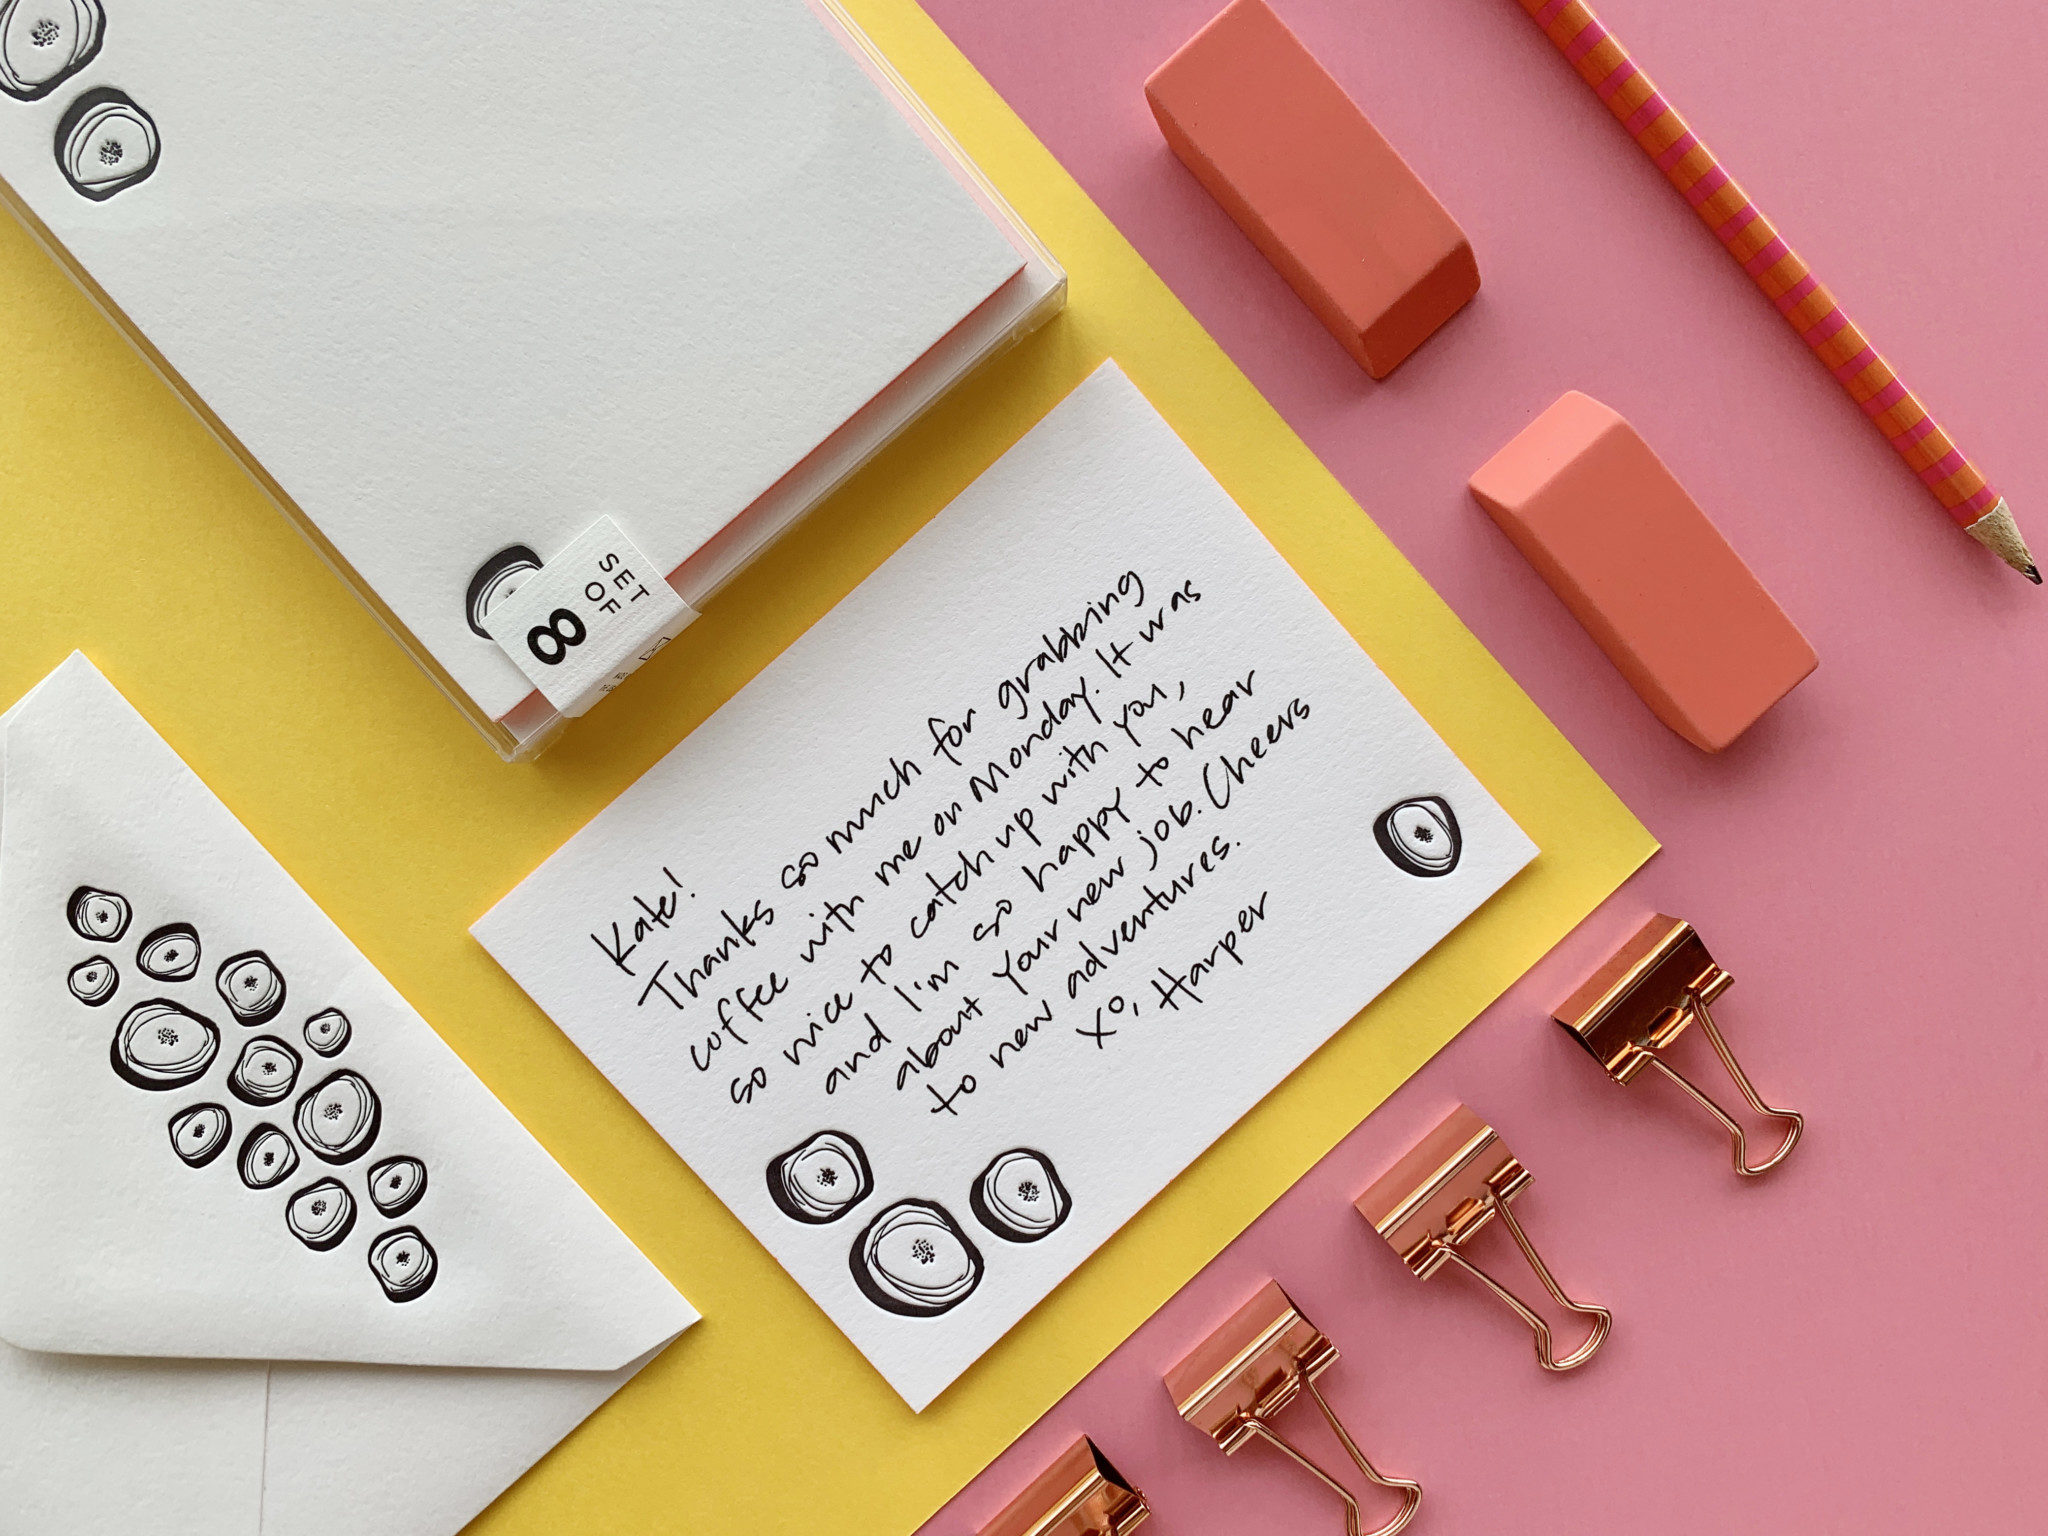 Social Stationery sets on a layered paper background